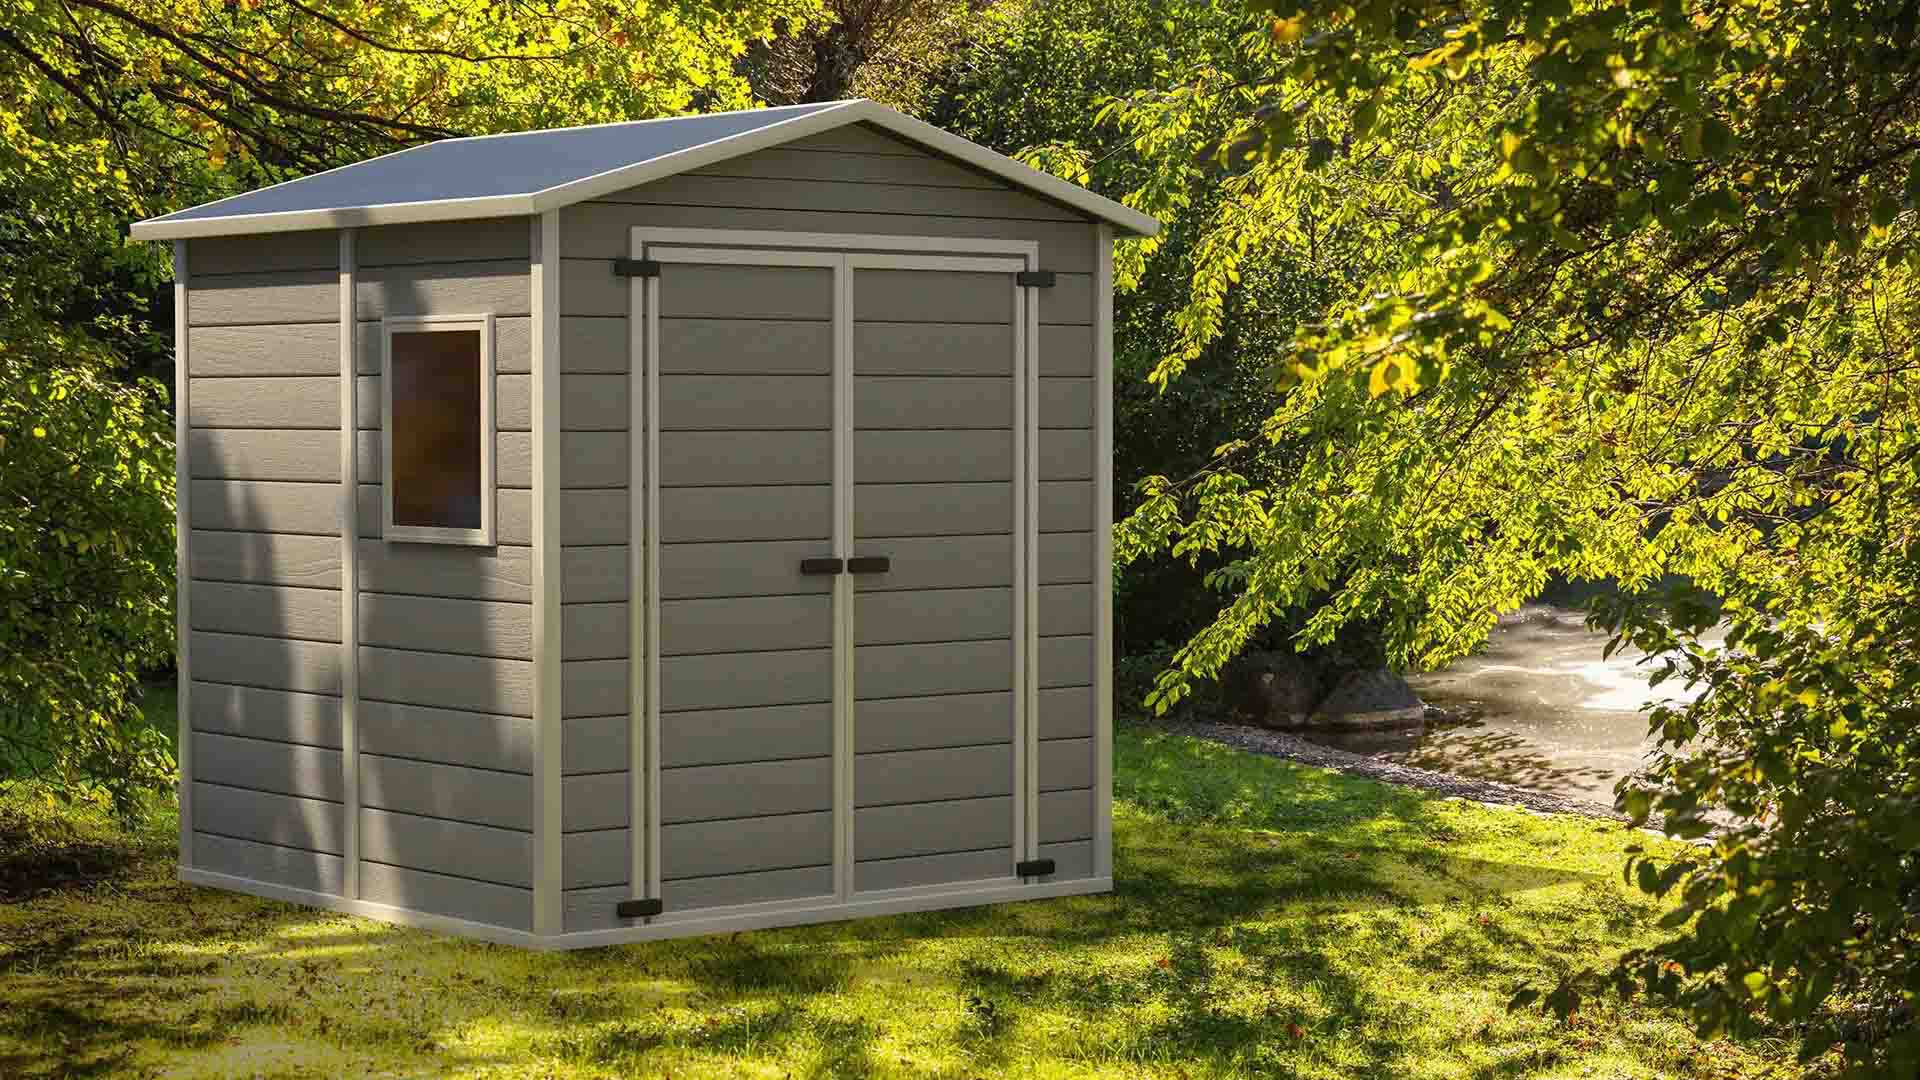 Sun Rise Sheds | Backyard Storage: The Benefits of Having a Shed in Your Backyard